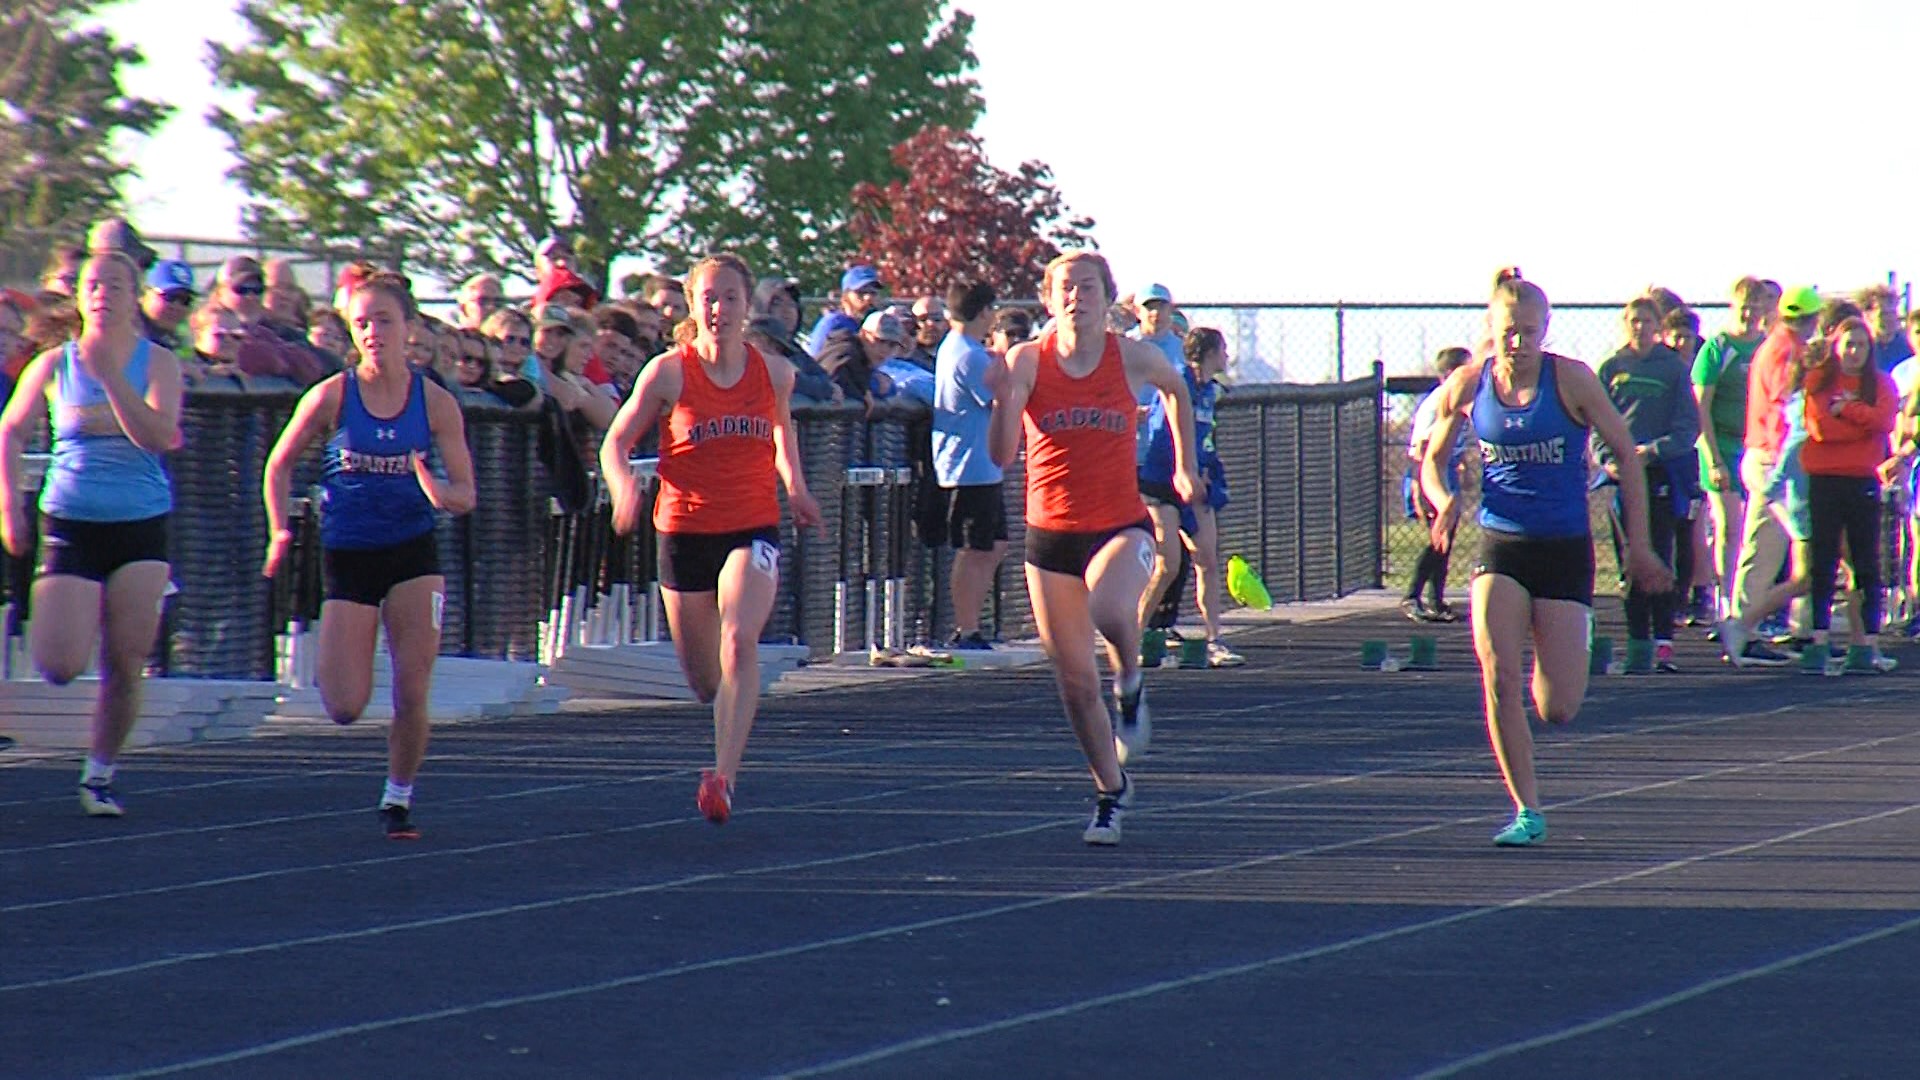 Madrid S Dynamic Sprinting Duo Looking To Go 1 2 At State In The 100m Dash Weareiowa Com